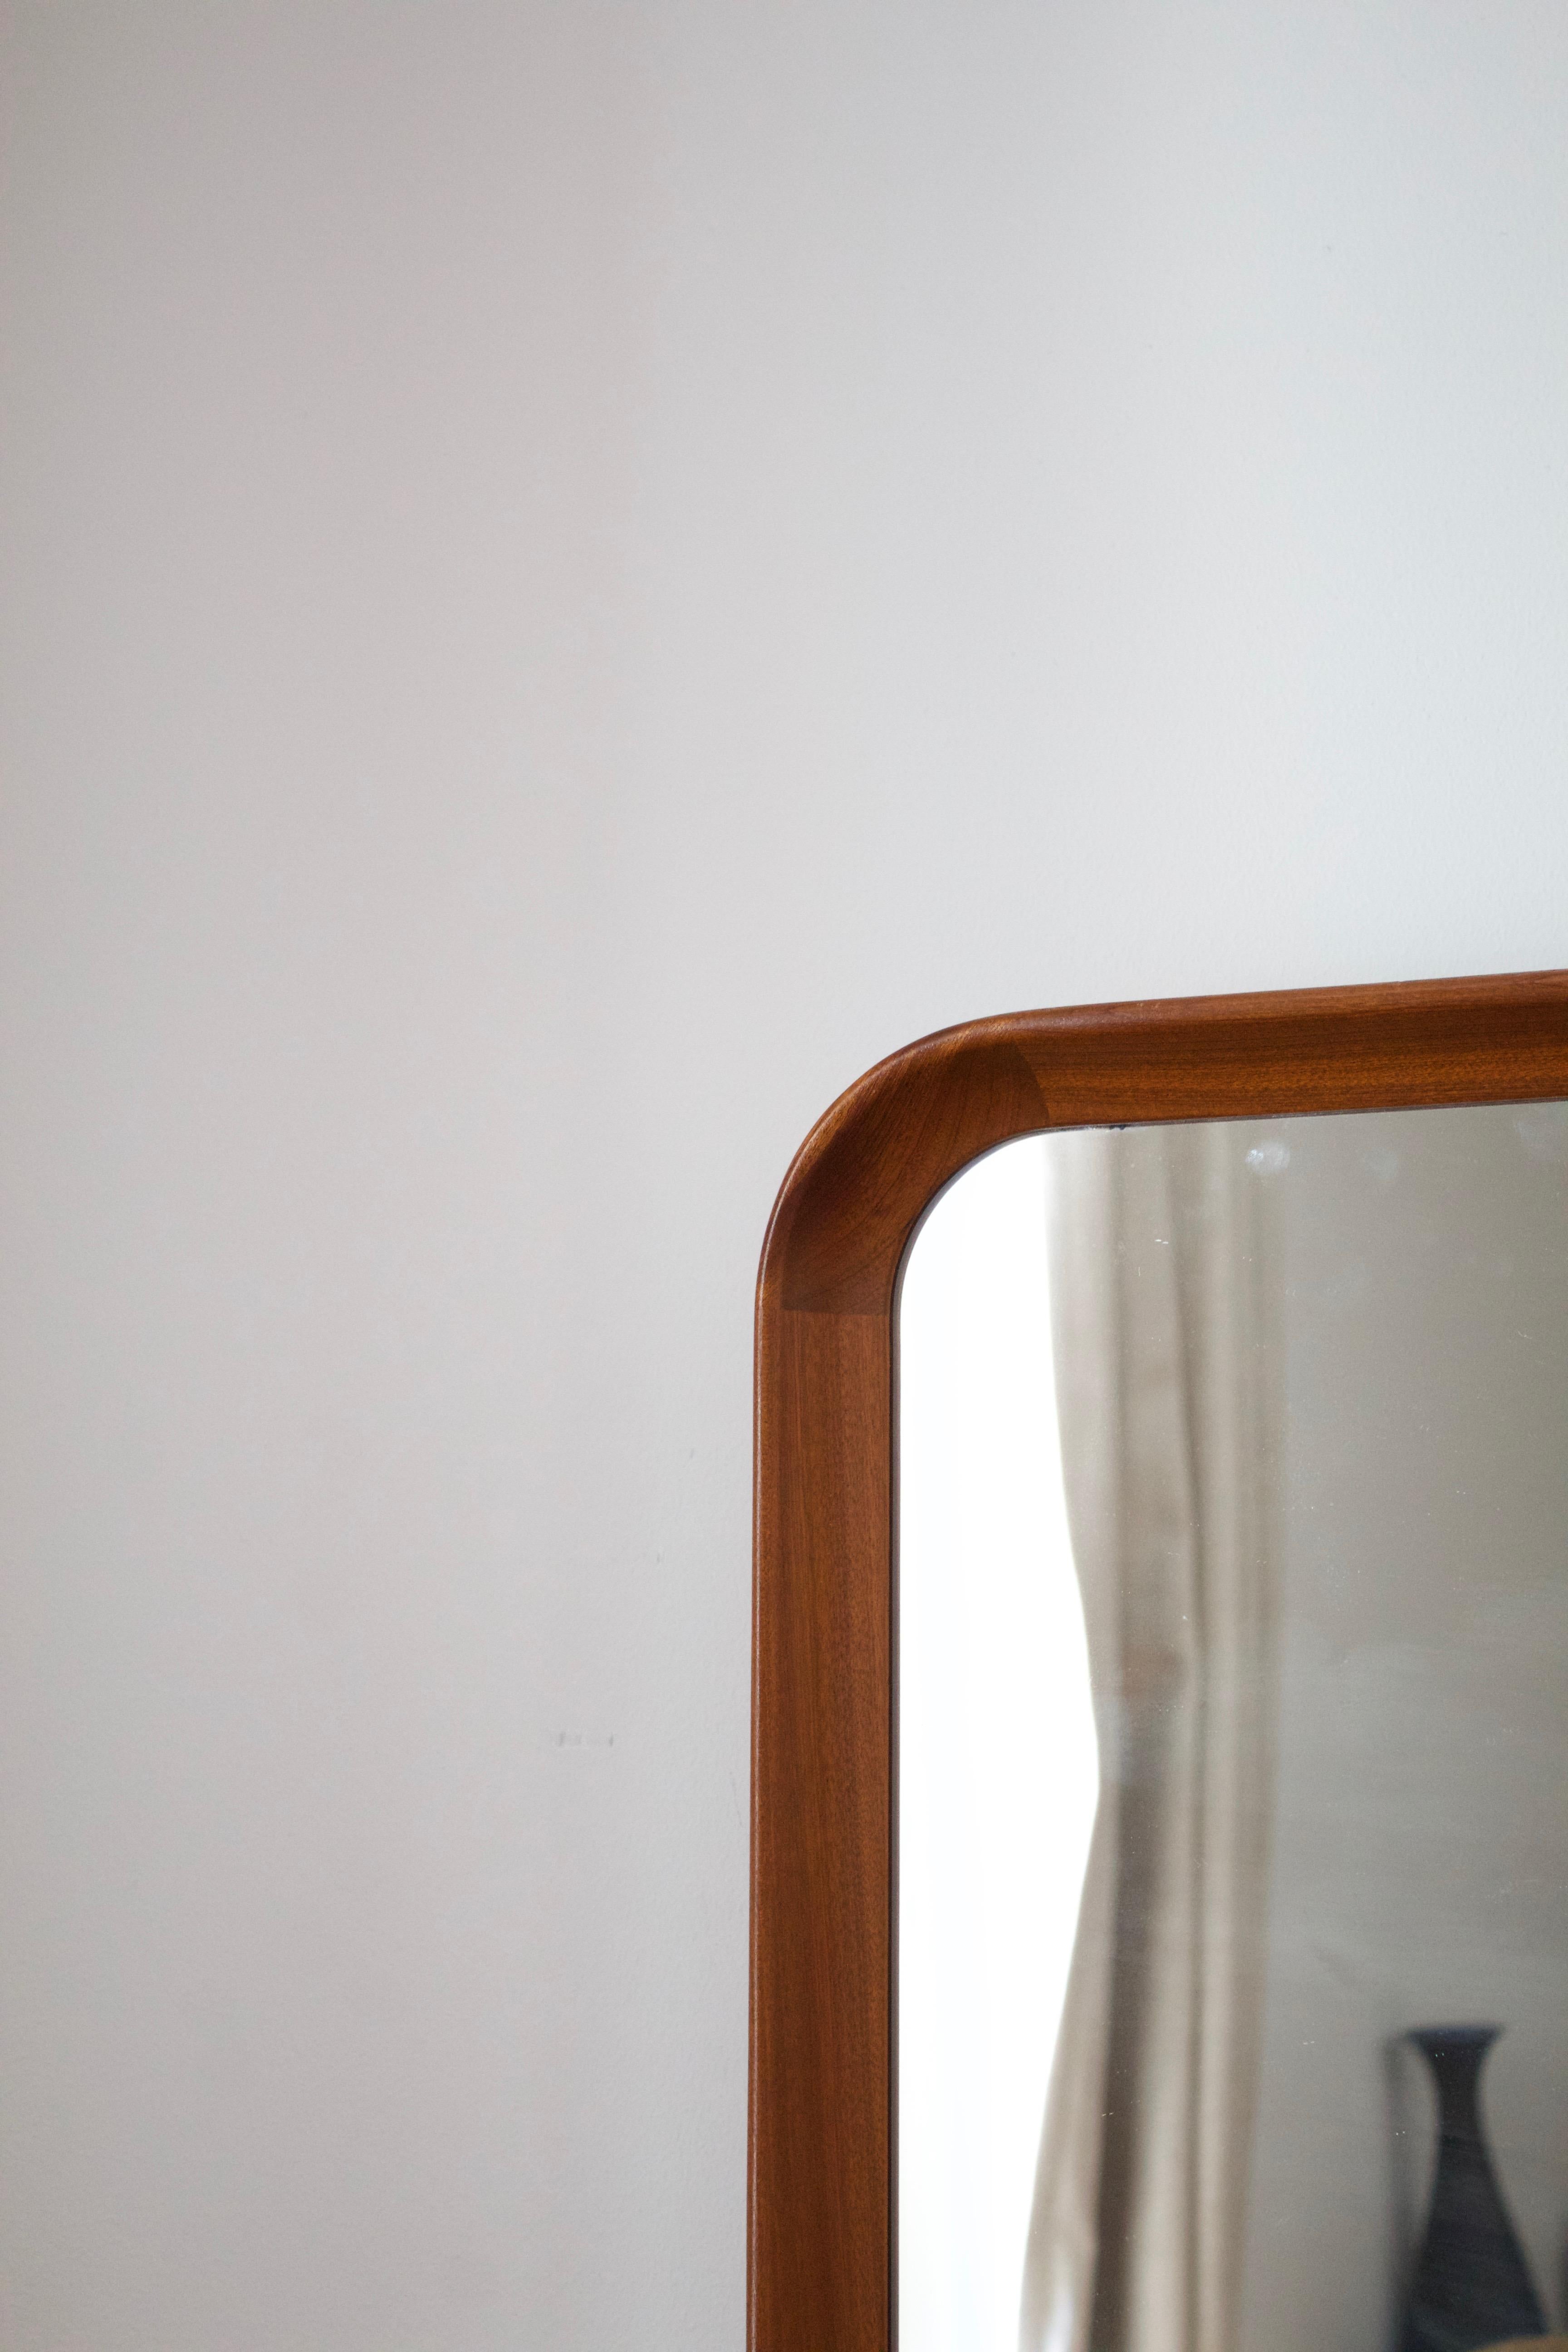 A wall mirror with its original mirror glass, solid teak frame. Produced by Oy Stockmann Ab, Keravan puusepäntehdas, Finland, 1950s. Stamped.

Rigid and of high production quality, typical of goods commissioned by Stockmann, the high-end